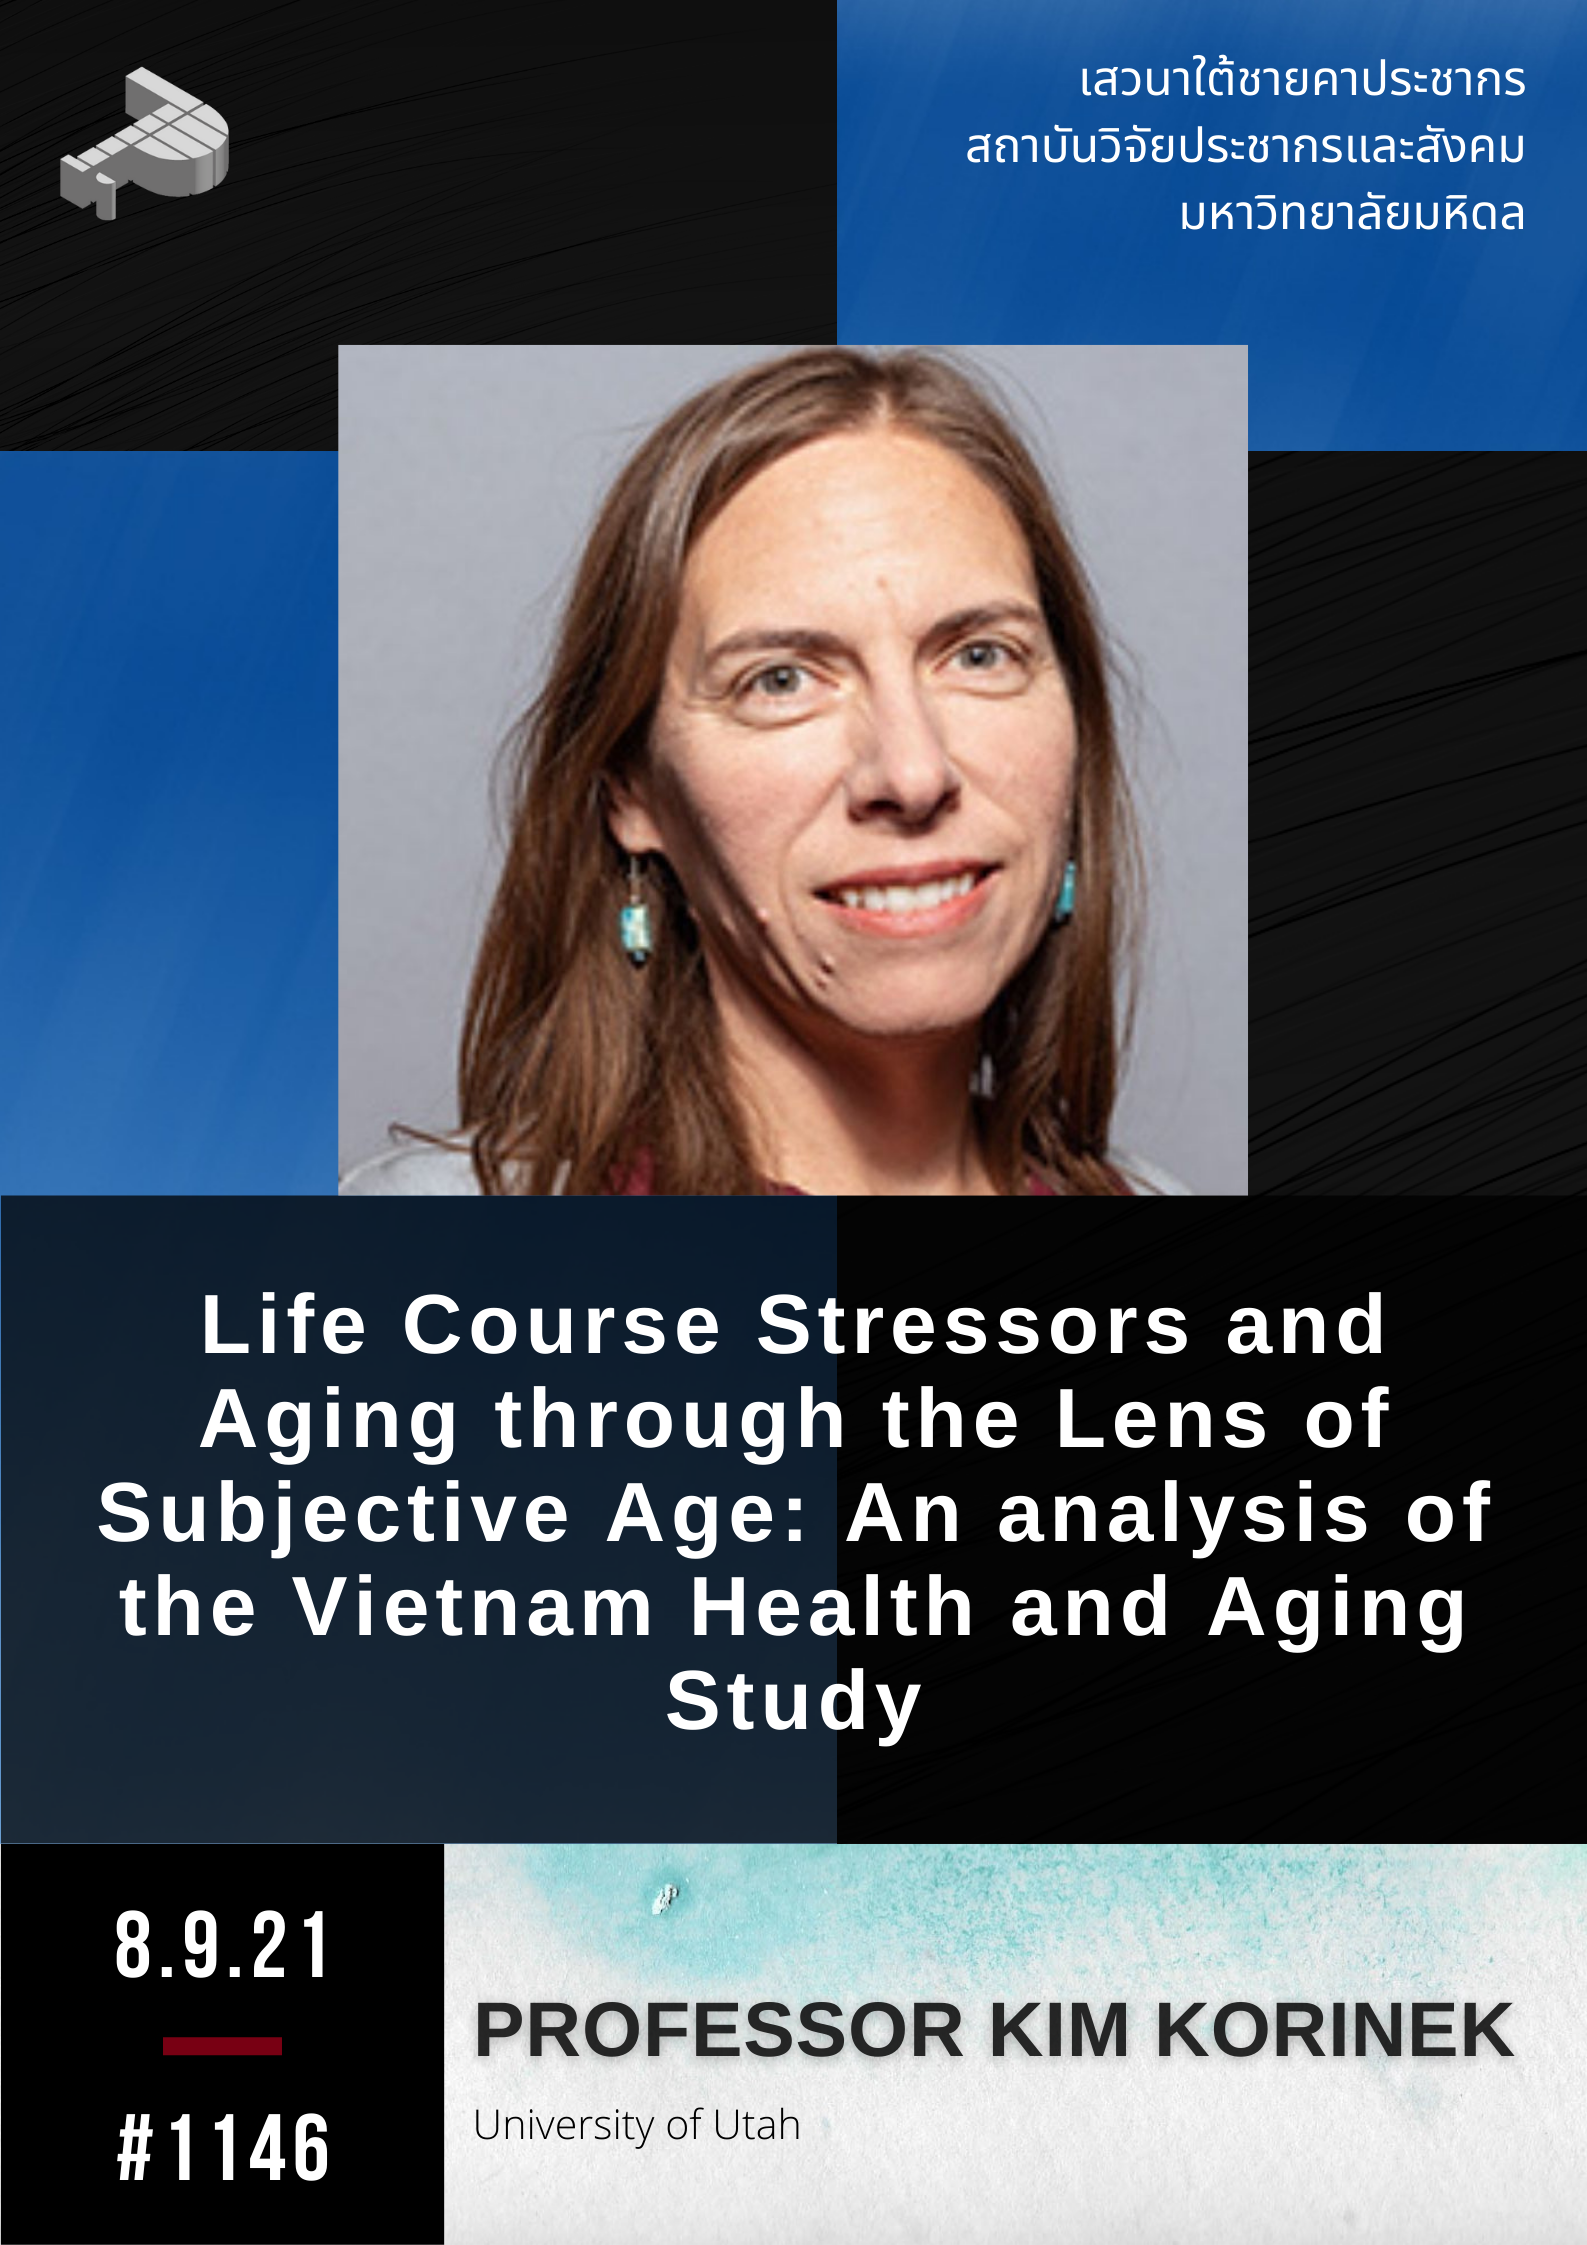 Life Course Stressors and Aging through the Lens of Subjective Age: An analysis of the Vietnam Health and Aging Study